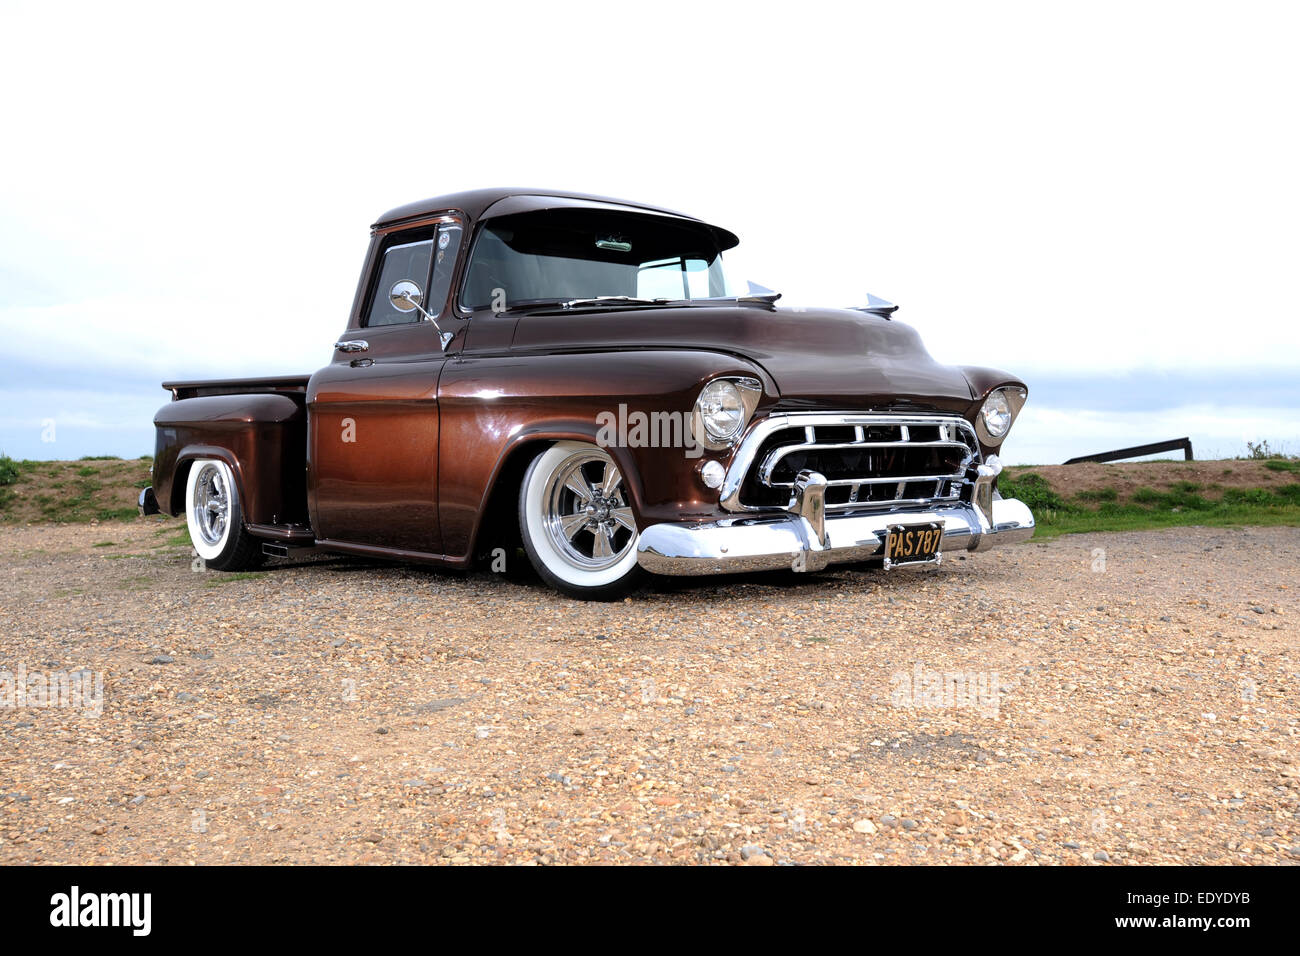 Modified 1957 Chevy 3100 step-side pickup truck Stock Photo